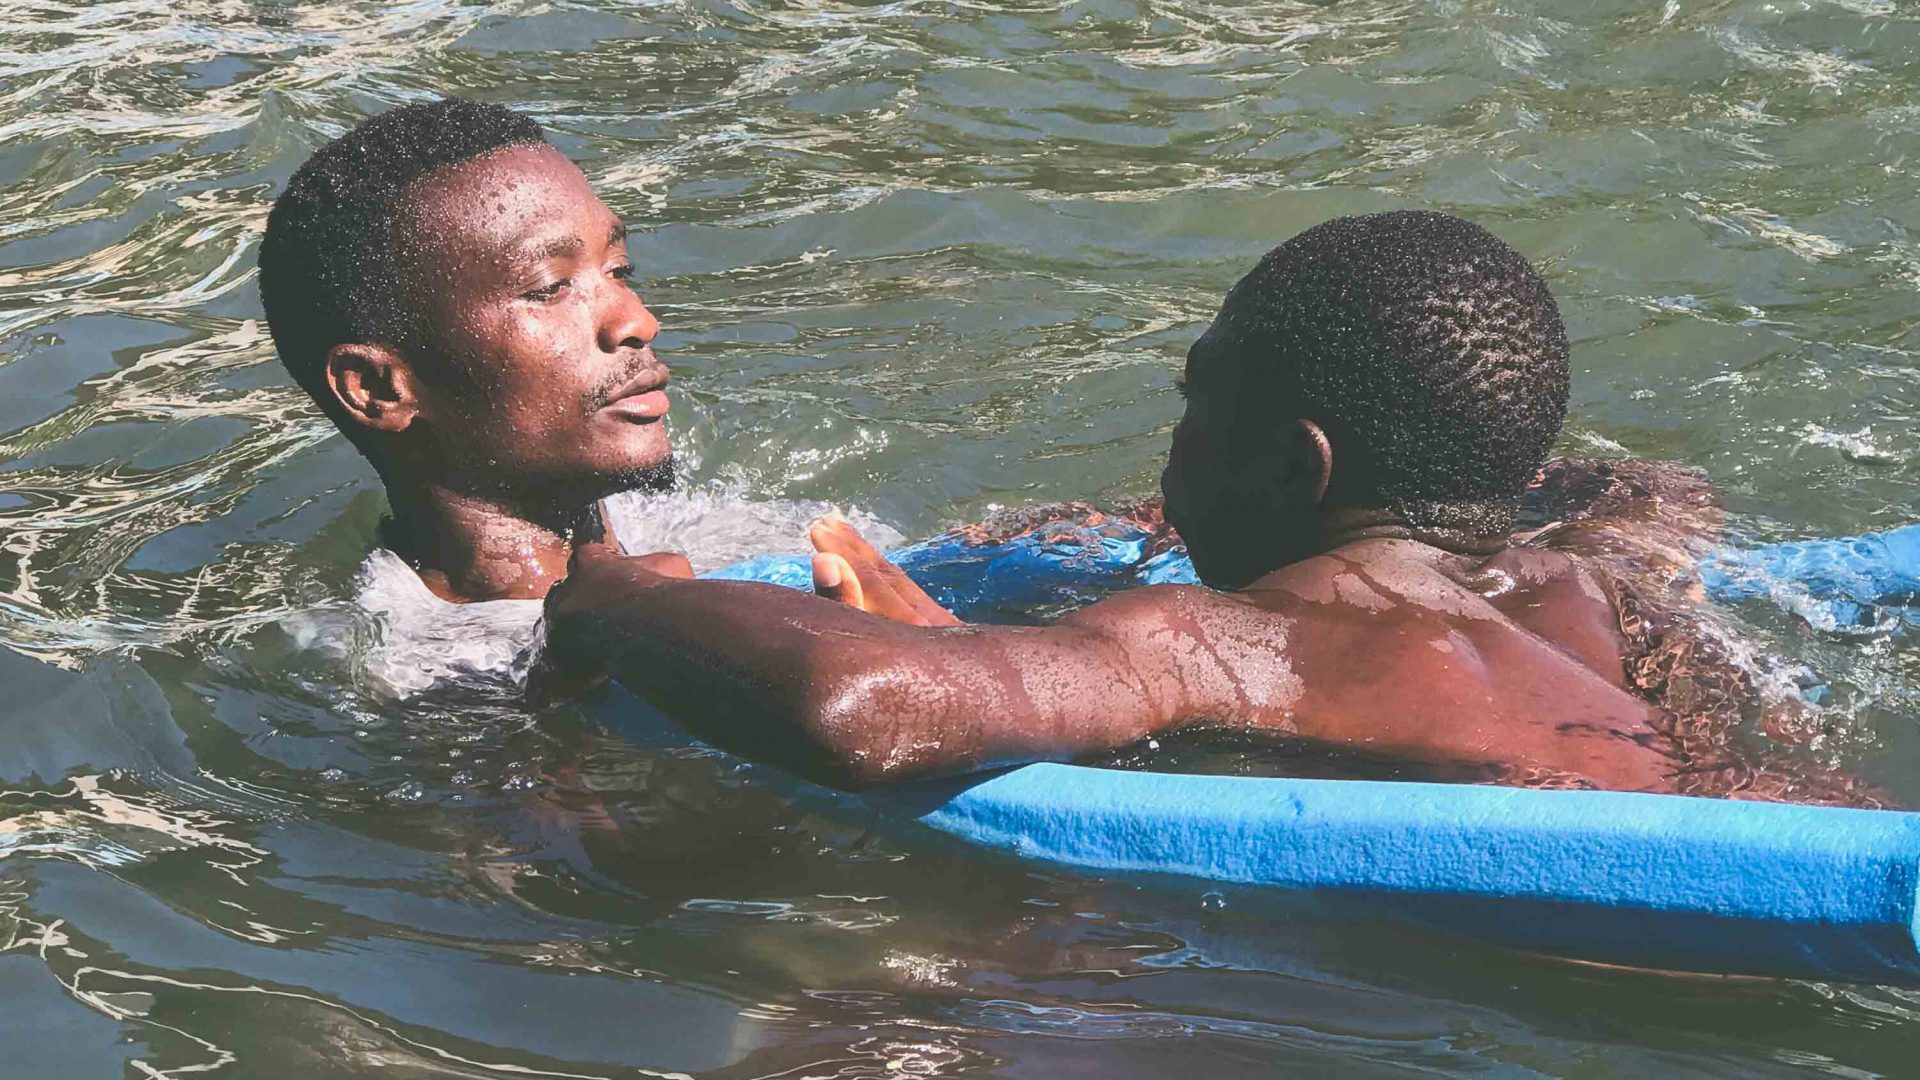 Pedro teaches swimming in Tofo in southeastern Mozambique as part of the Ocean Guardians program.